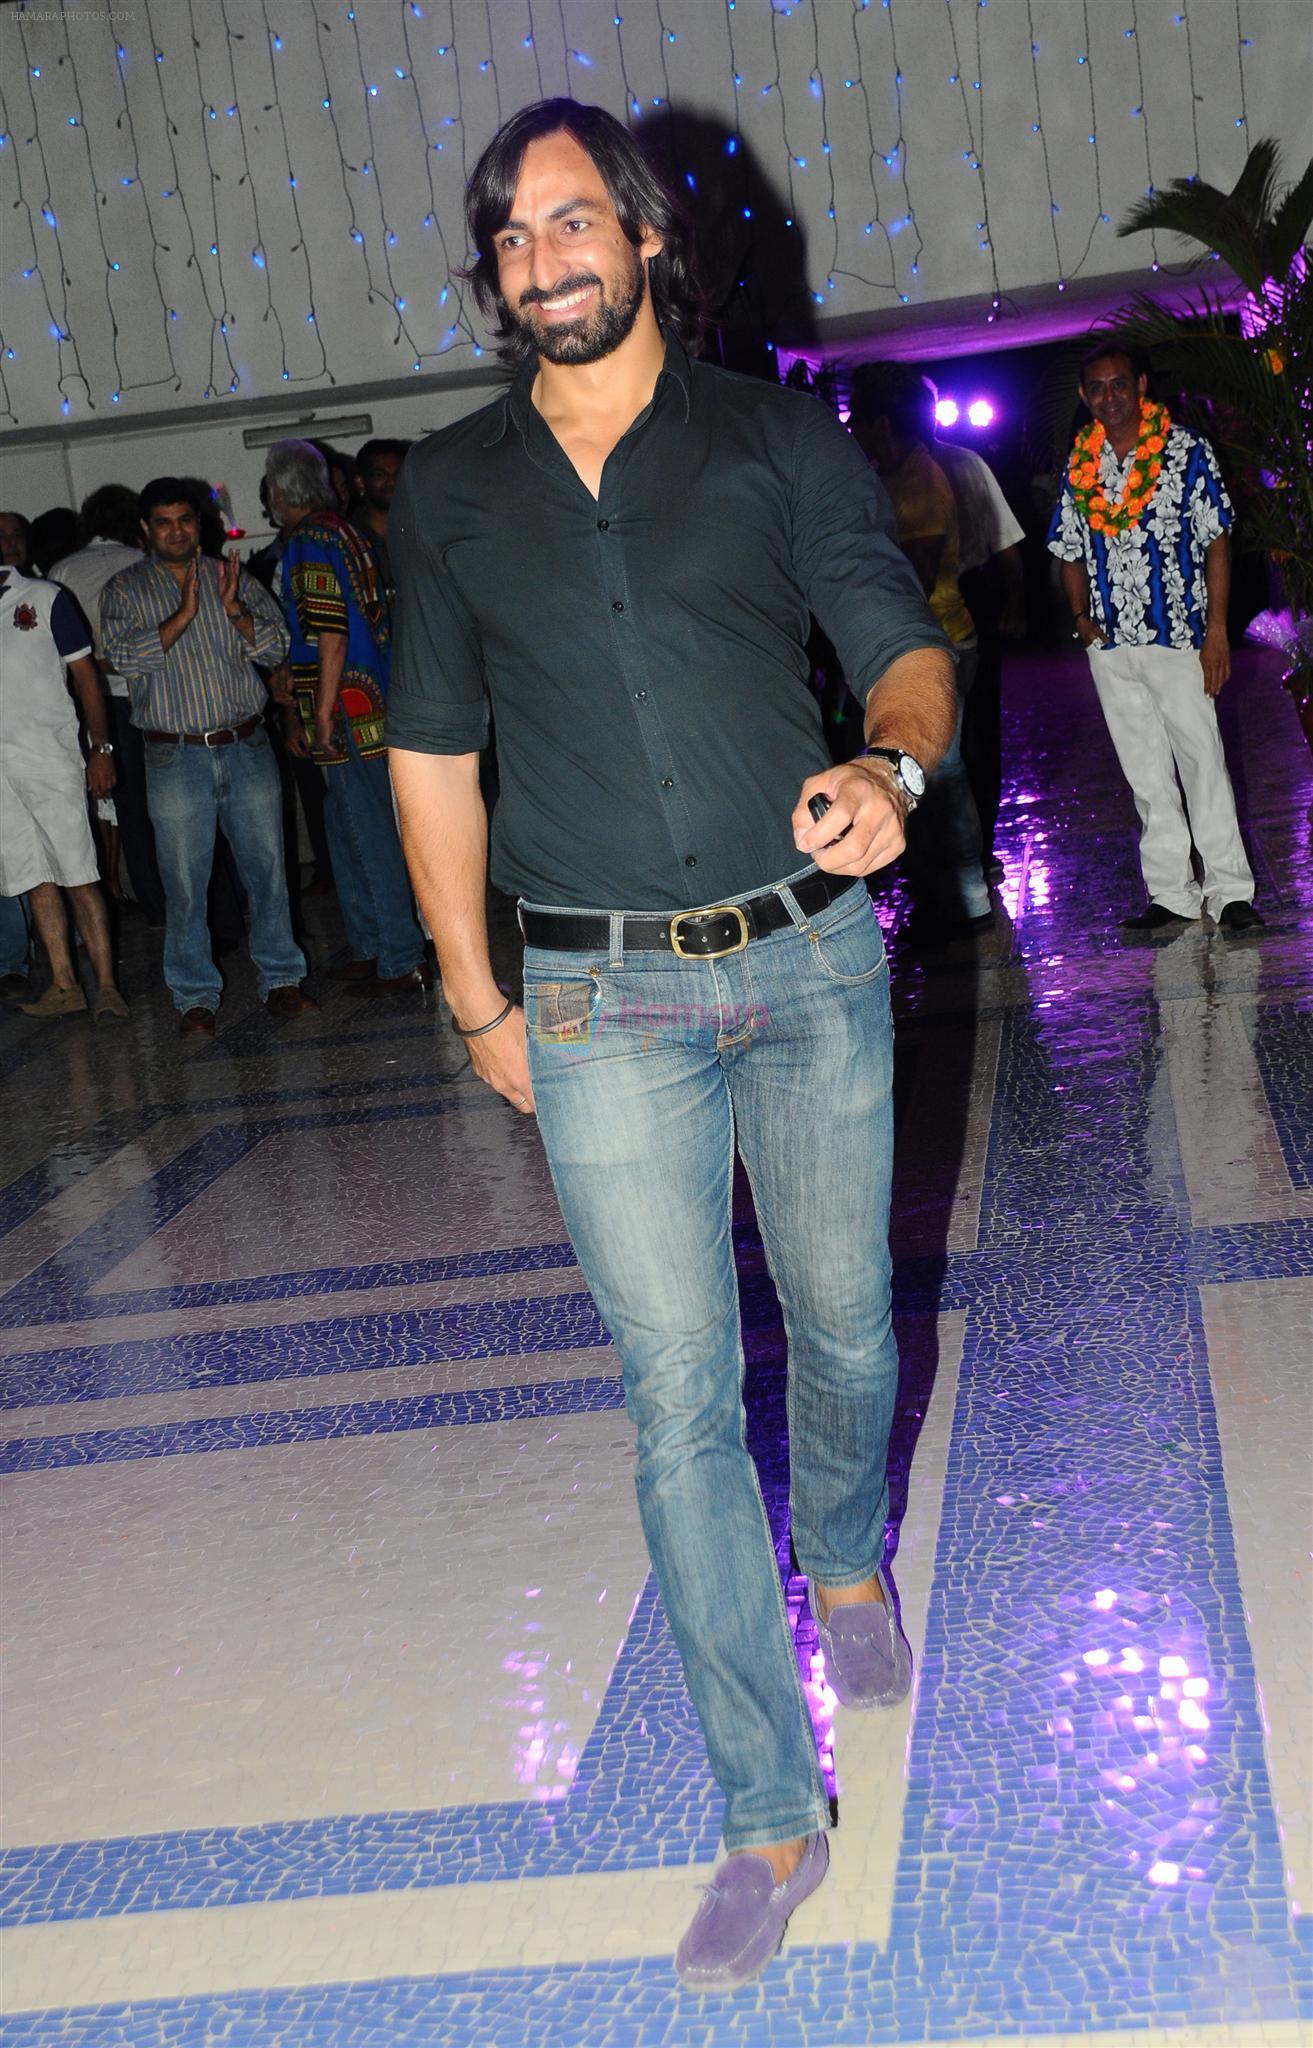 Vikramjeet Virk at Naughty at forty Hawain surprise birthday party by Amy Billimoria on 12th March 2012